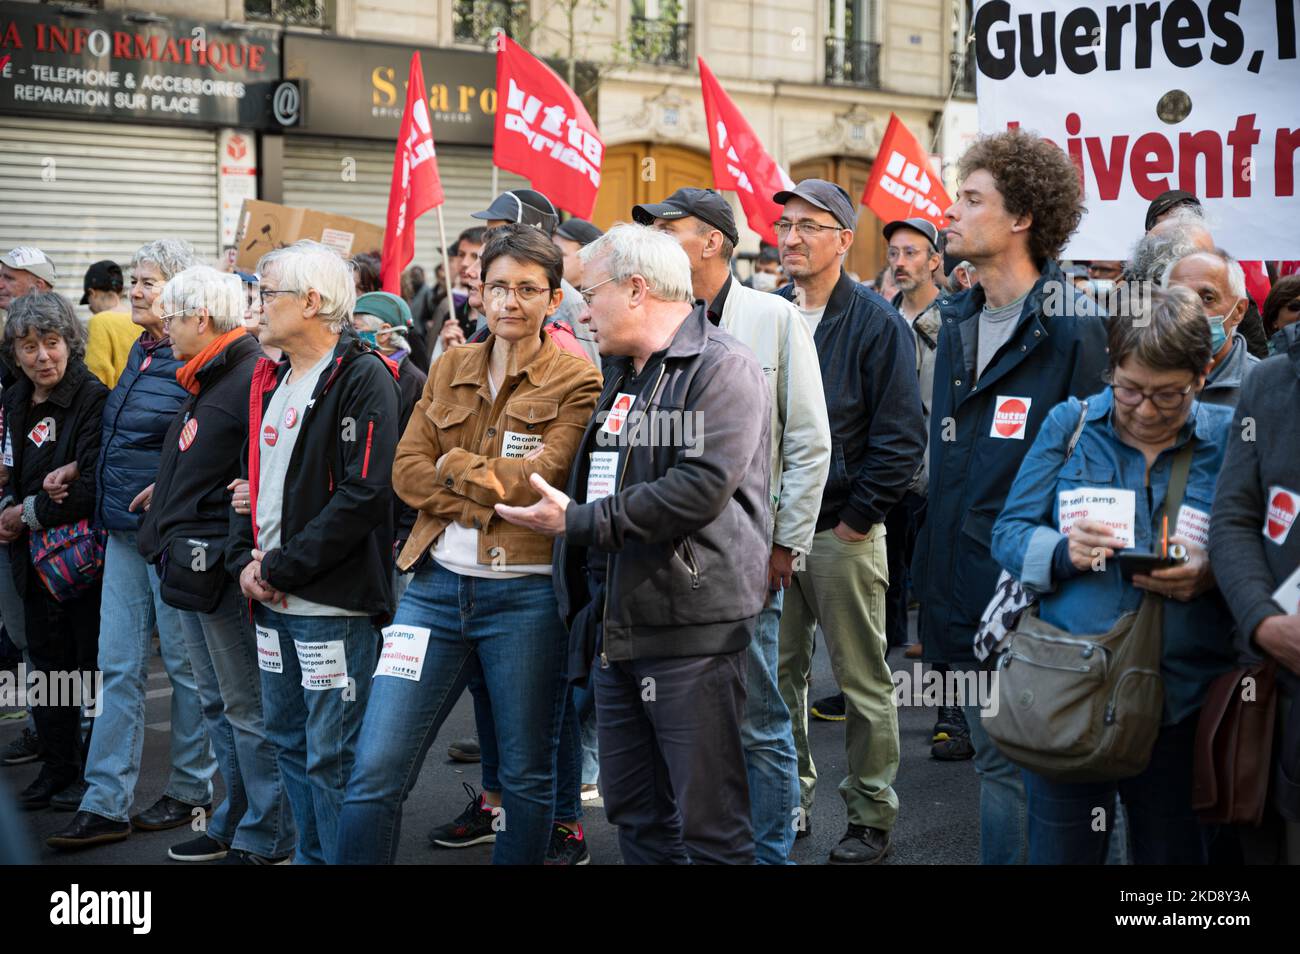 Nathalie Arthaud, leader and former presidential candidate of the Lutte Ouvrière party was present at the traditional May Day demonstration in Paris (Labor Day) marking International Workers' Day, starting from Place de la République in Paris, May 1, 2022. (Photo by Samuel Boivin/NurPhoto) Stock Photo